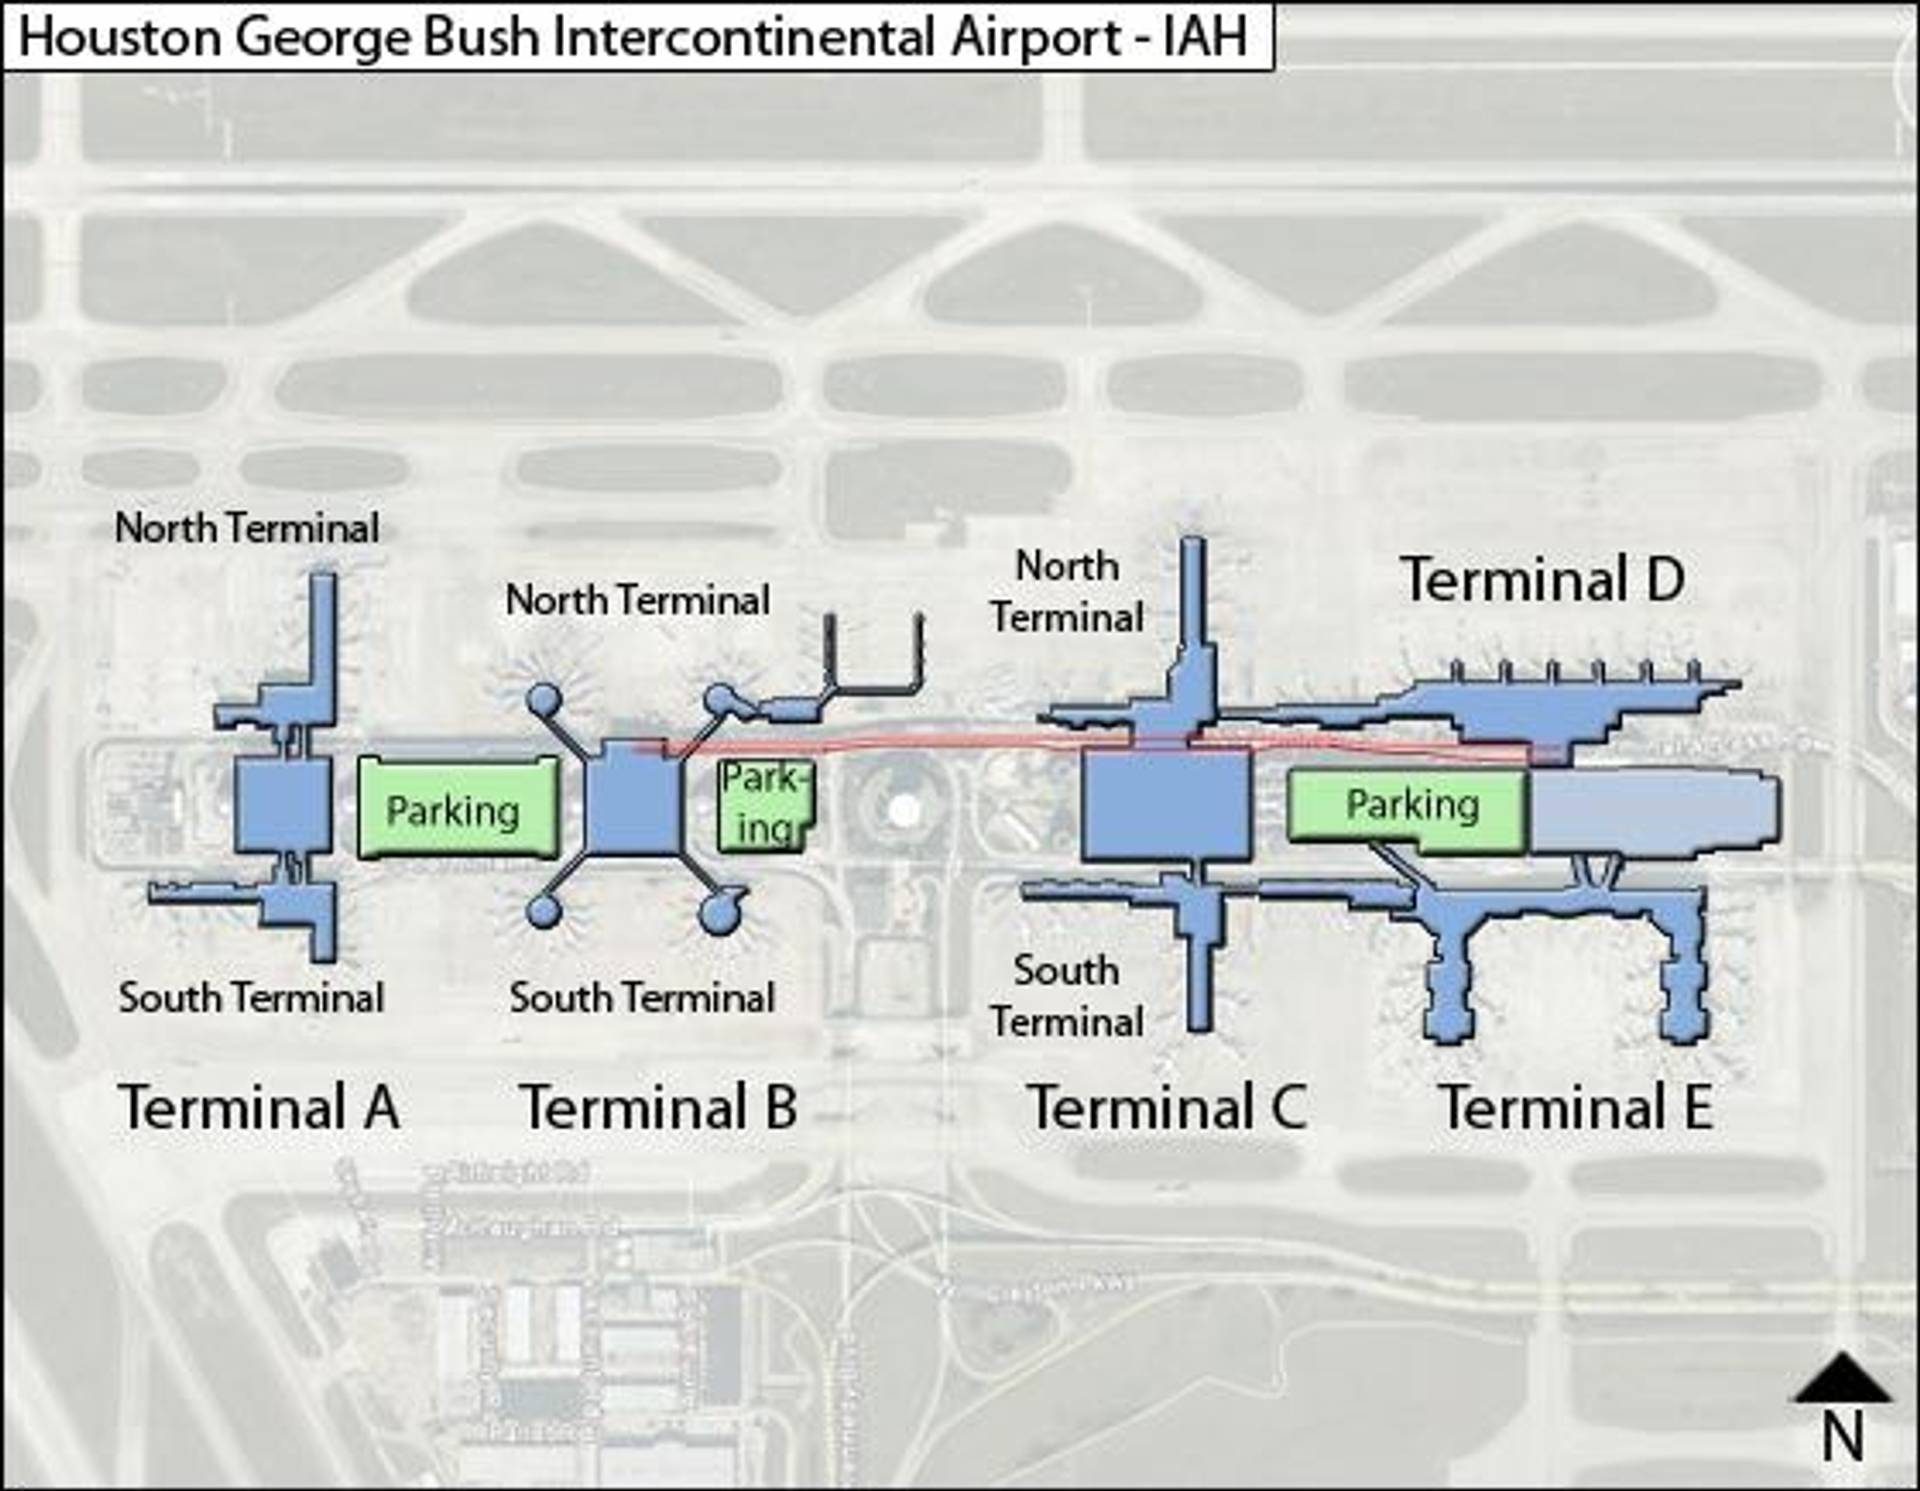 Houston Airport Map: Guide to IAH's Terminals